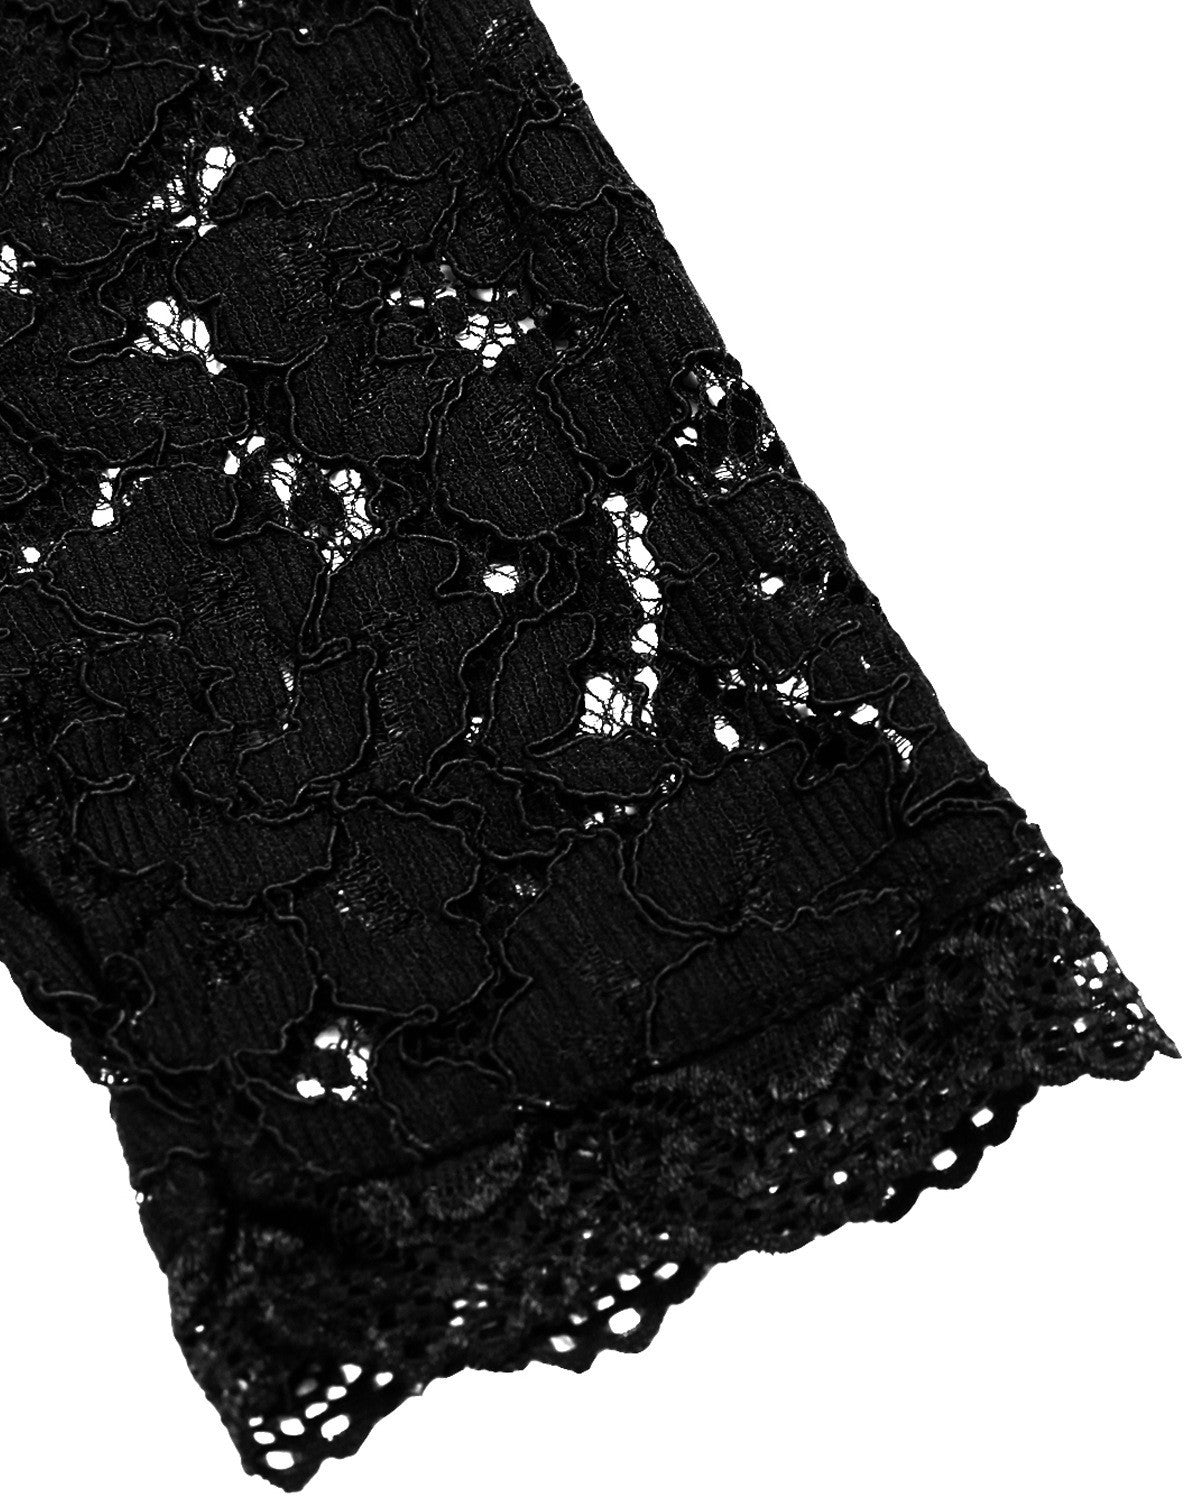 Sexy Black Lace Patchwork Bodycon Long Mermaid Dress